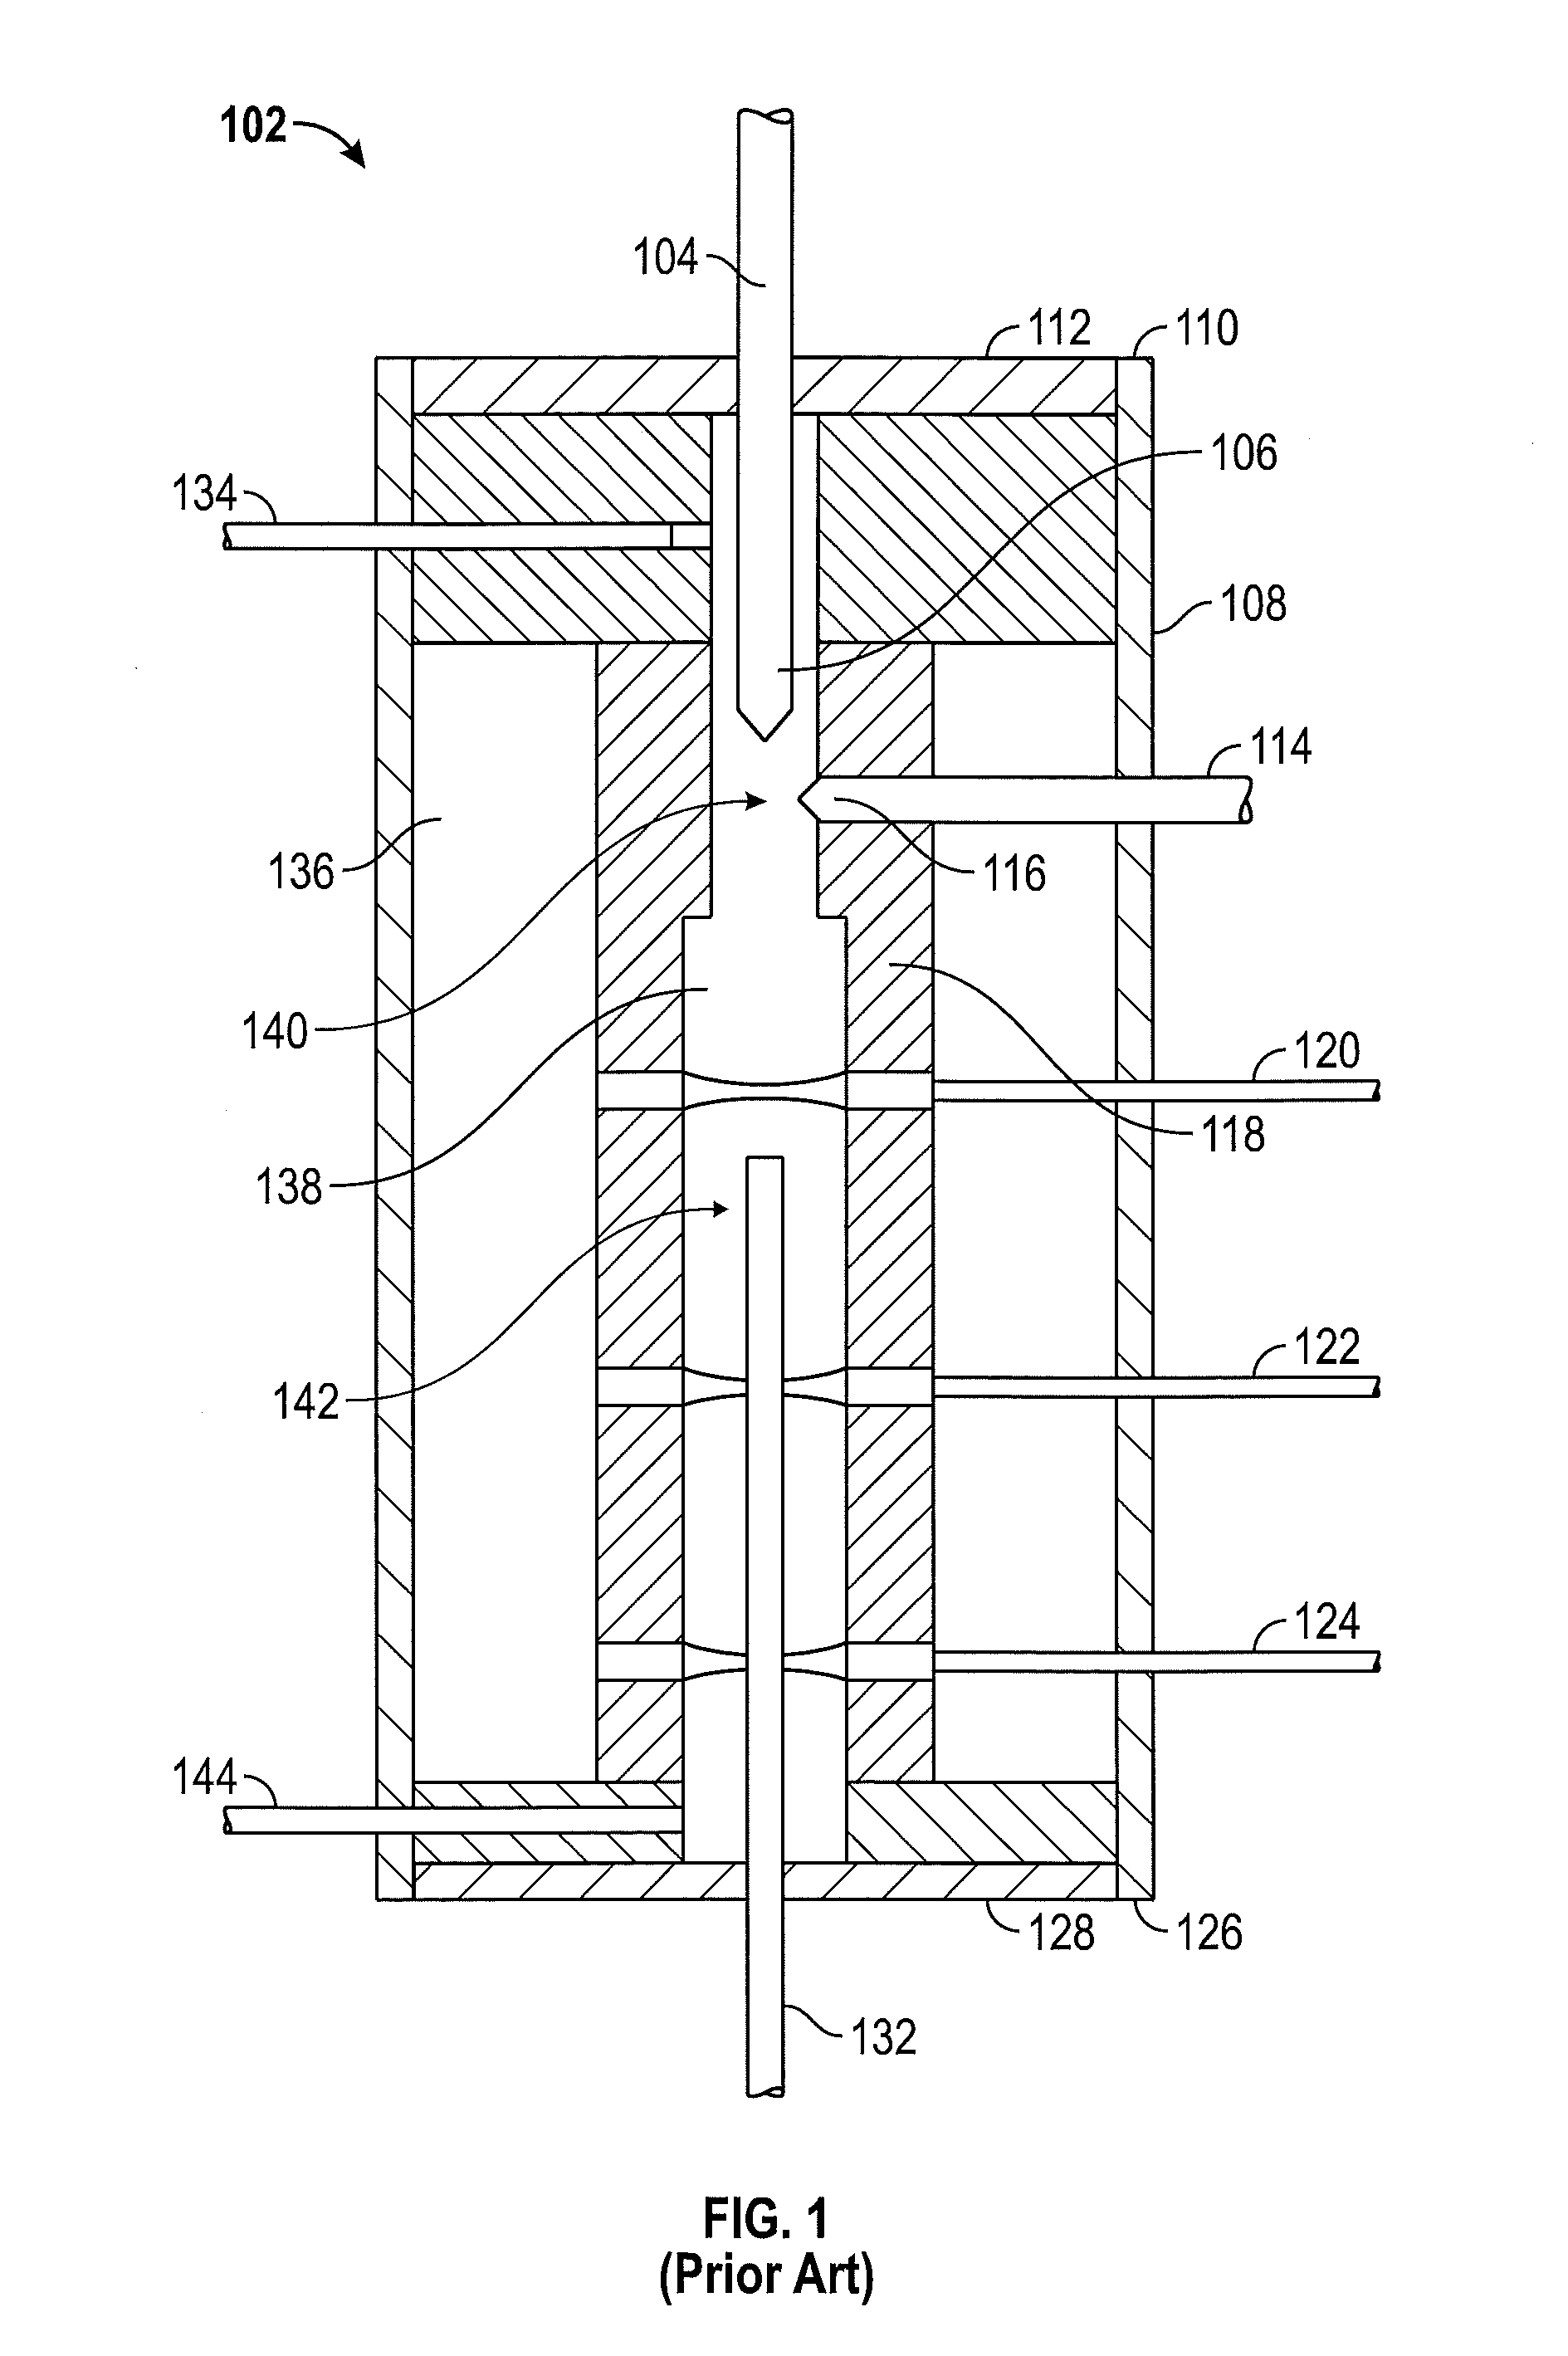 Pulsed discharge helium ionization detector with multiple combined bias/collecting electrodes for gas chromatography and method of use